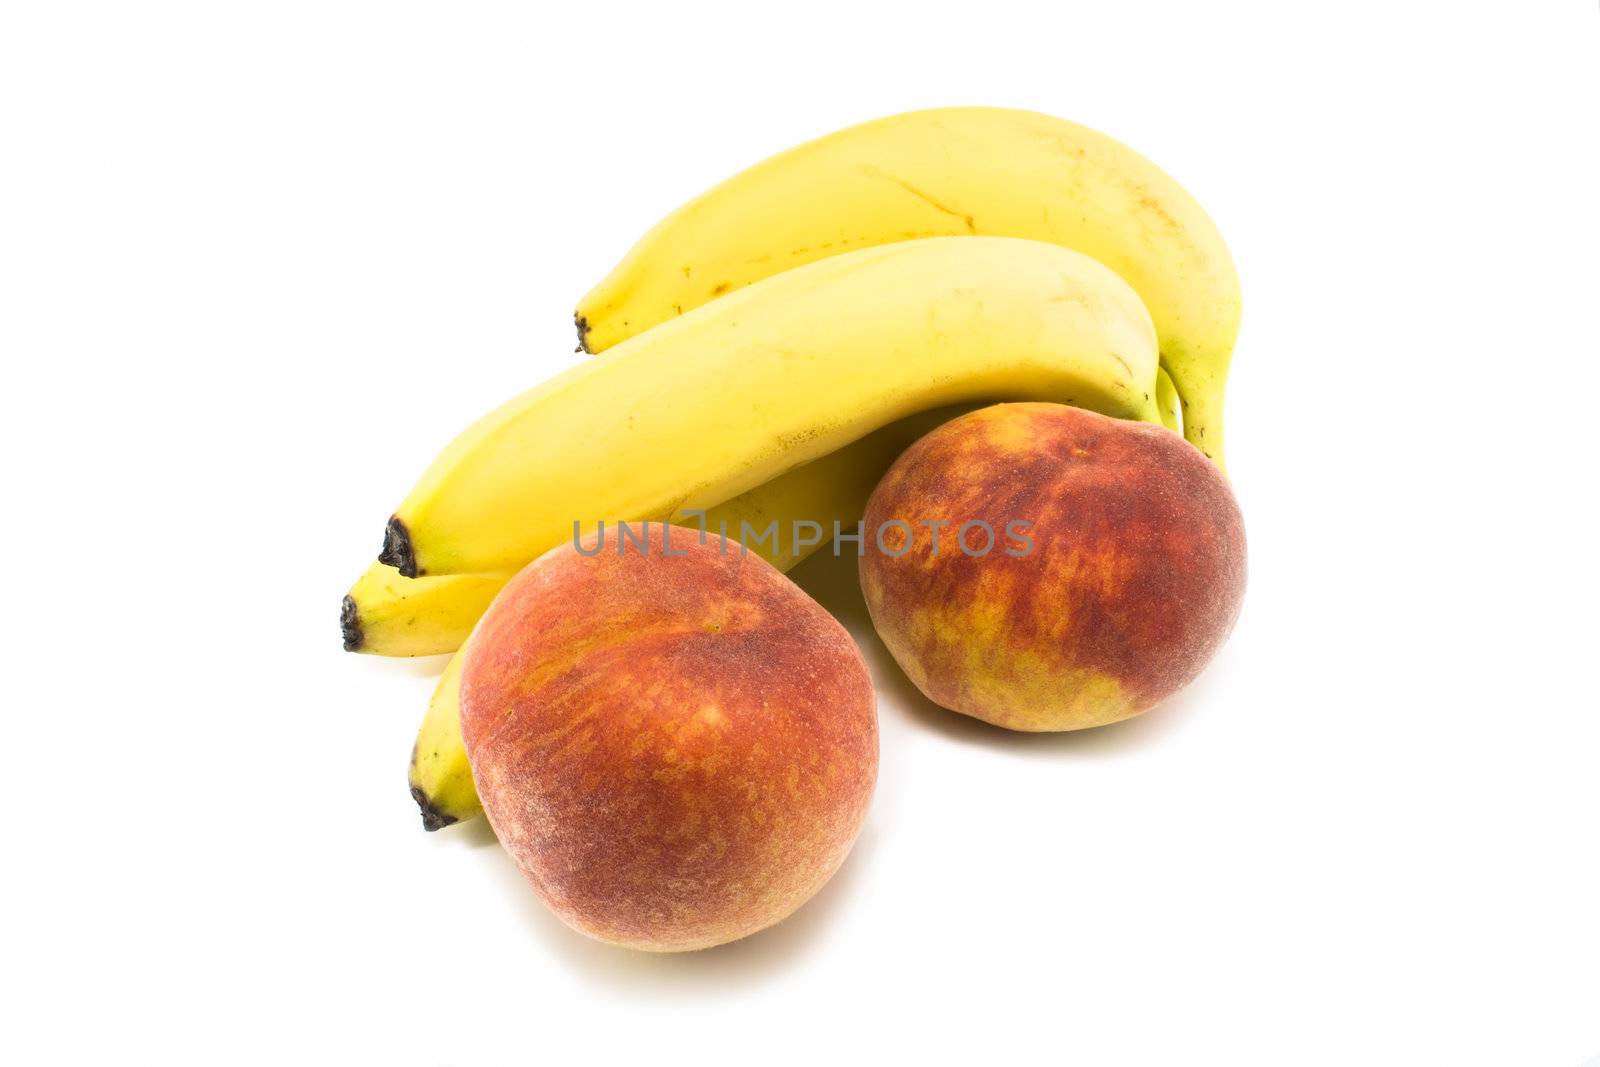 Bananas and peaches by magraphics